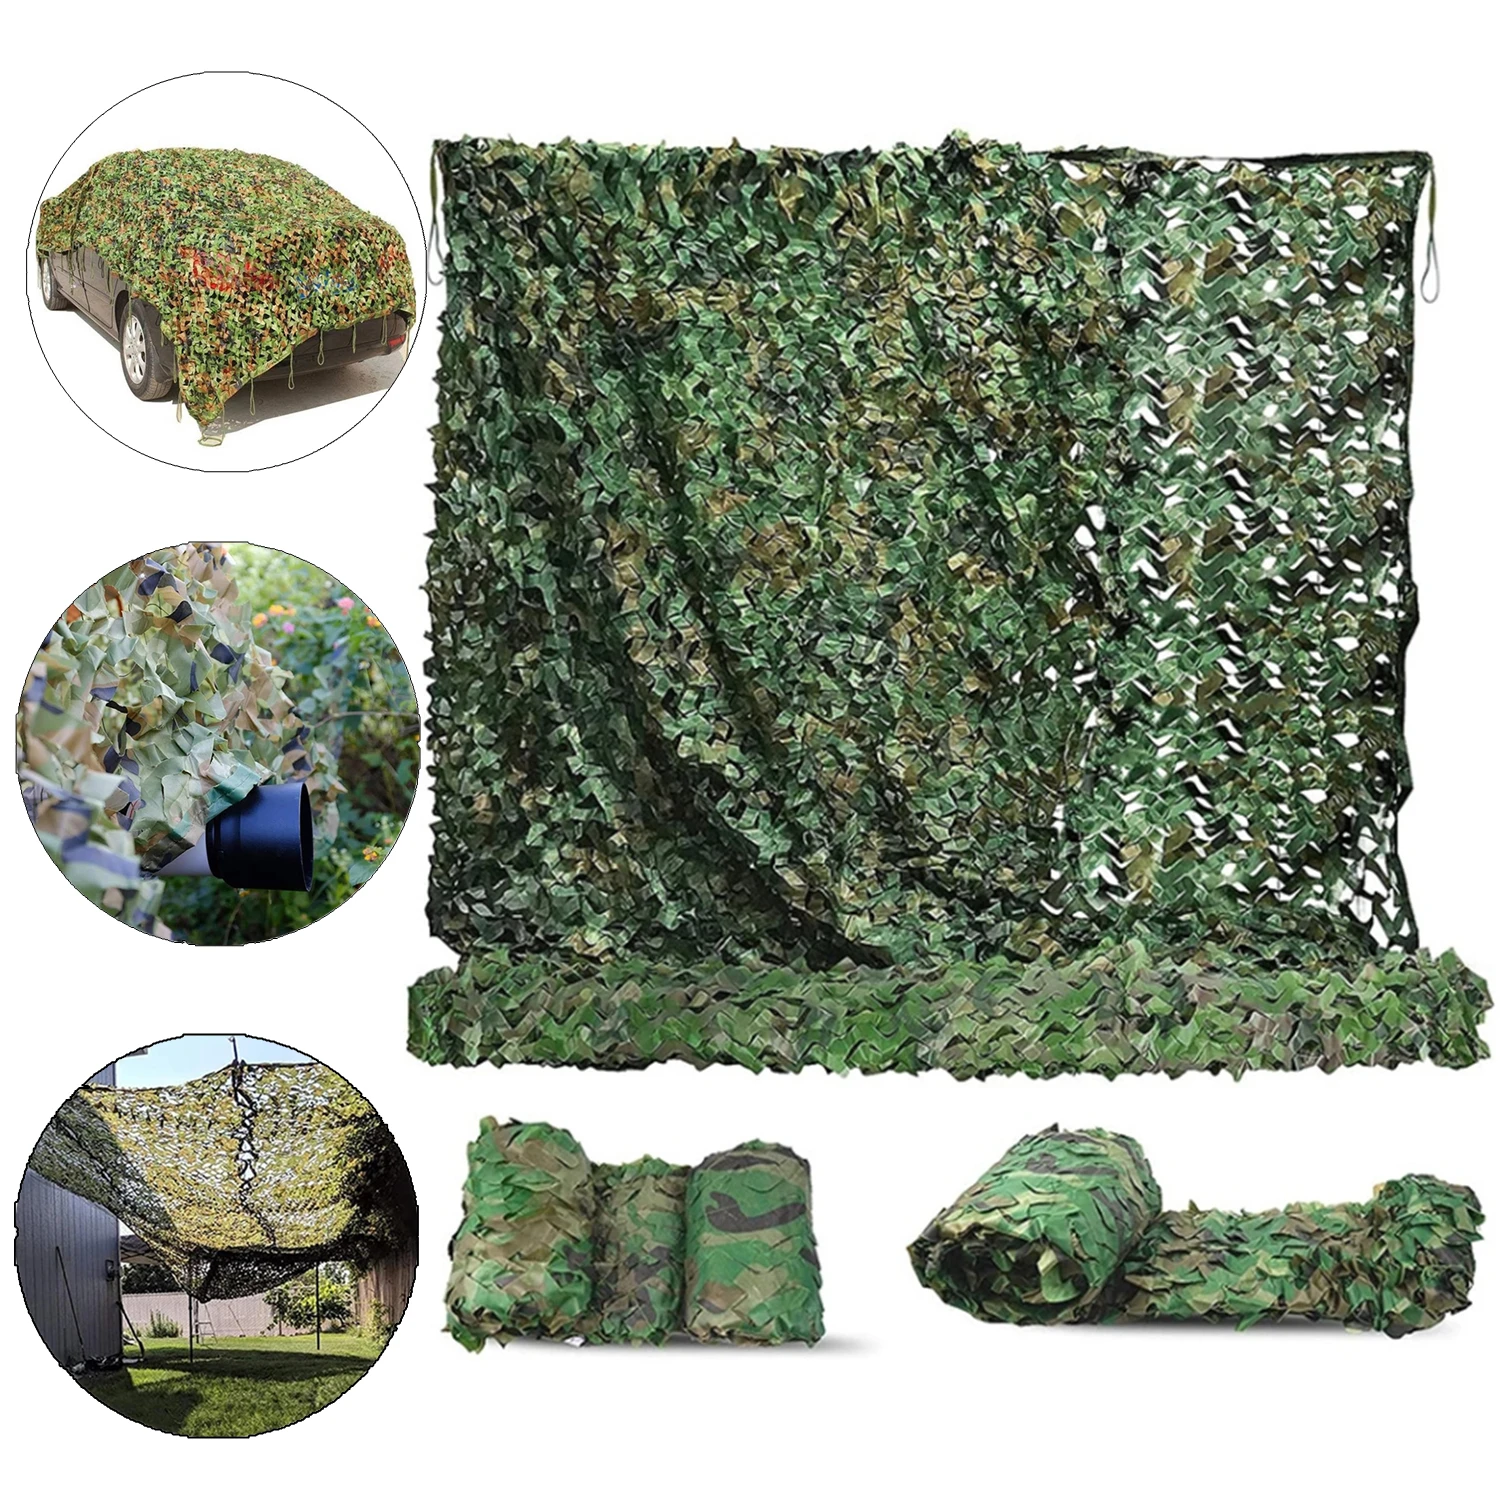 4x6m Large Sun Catcher Military Camouflage Net Garden Enclosure Nets Sun Shelter Tent Tarp Camping Huntng Awning Car Covers